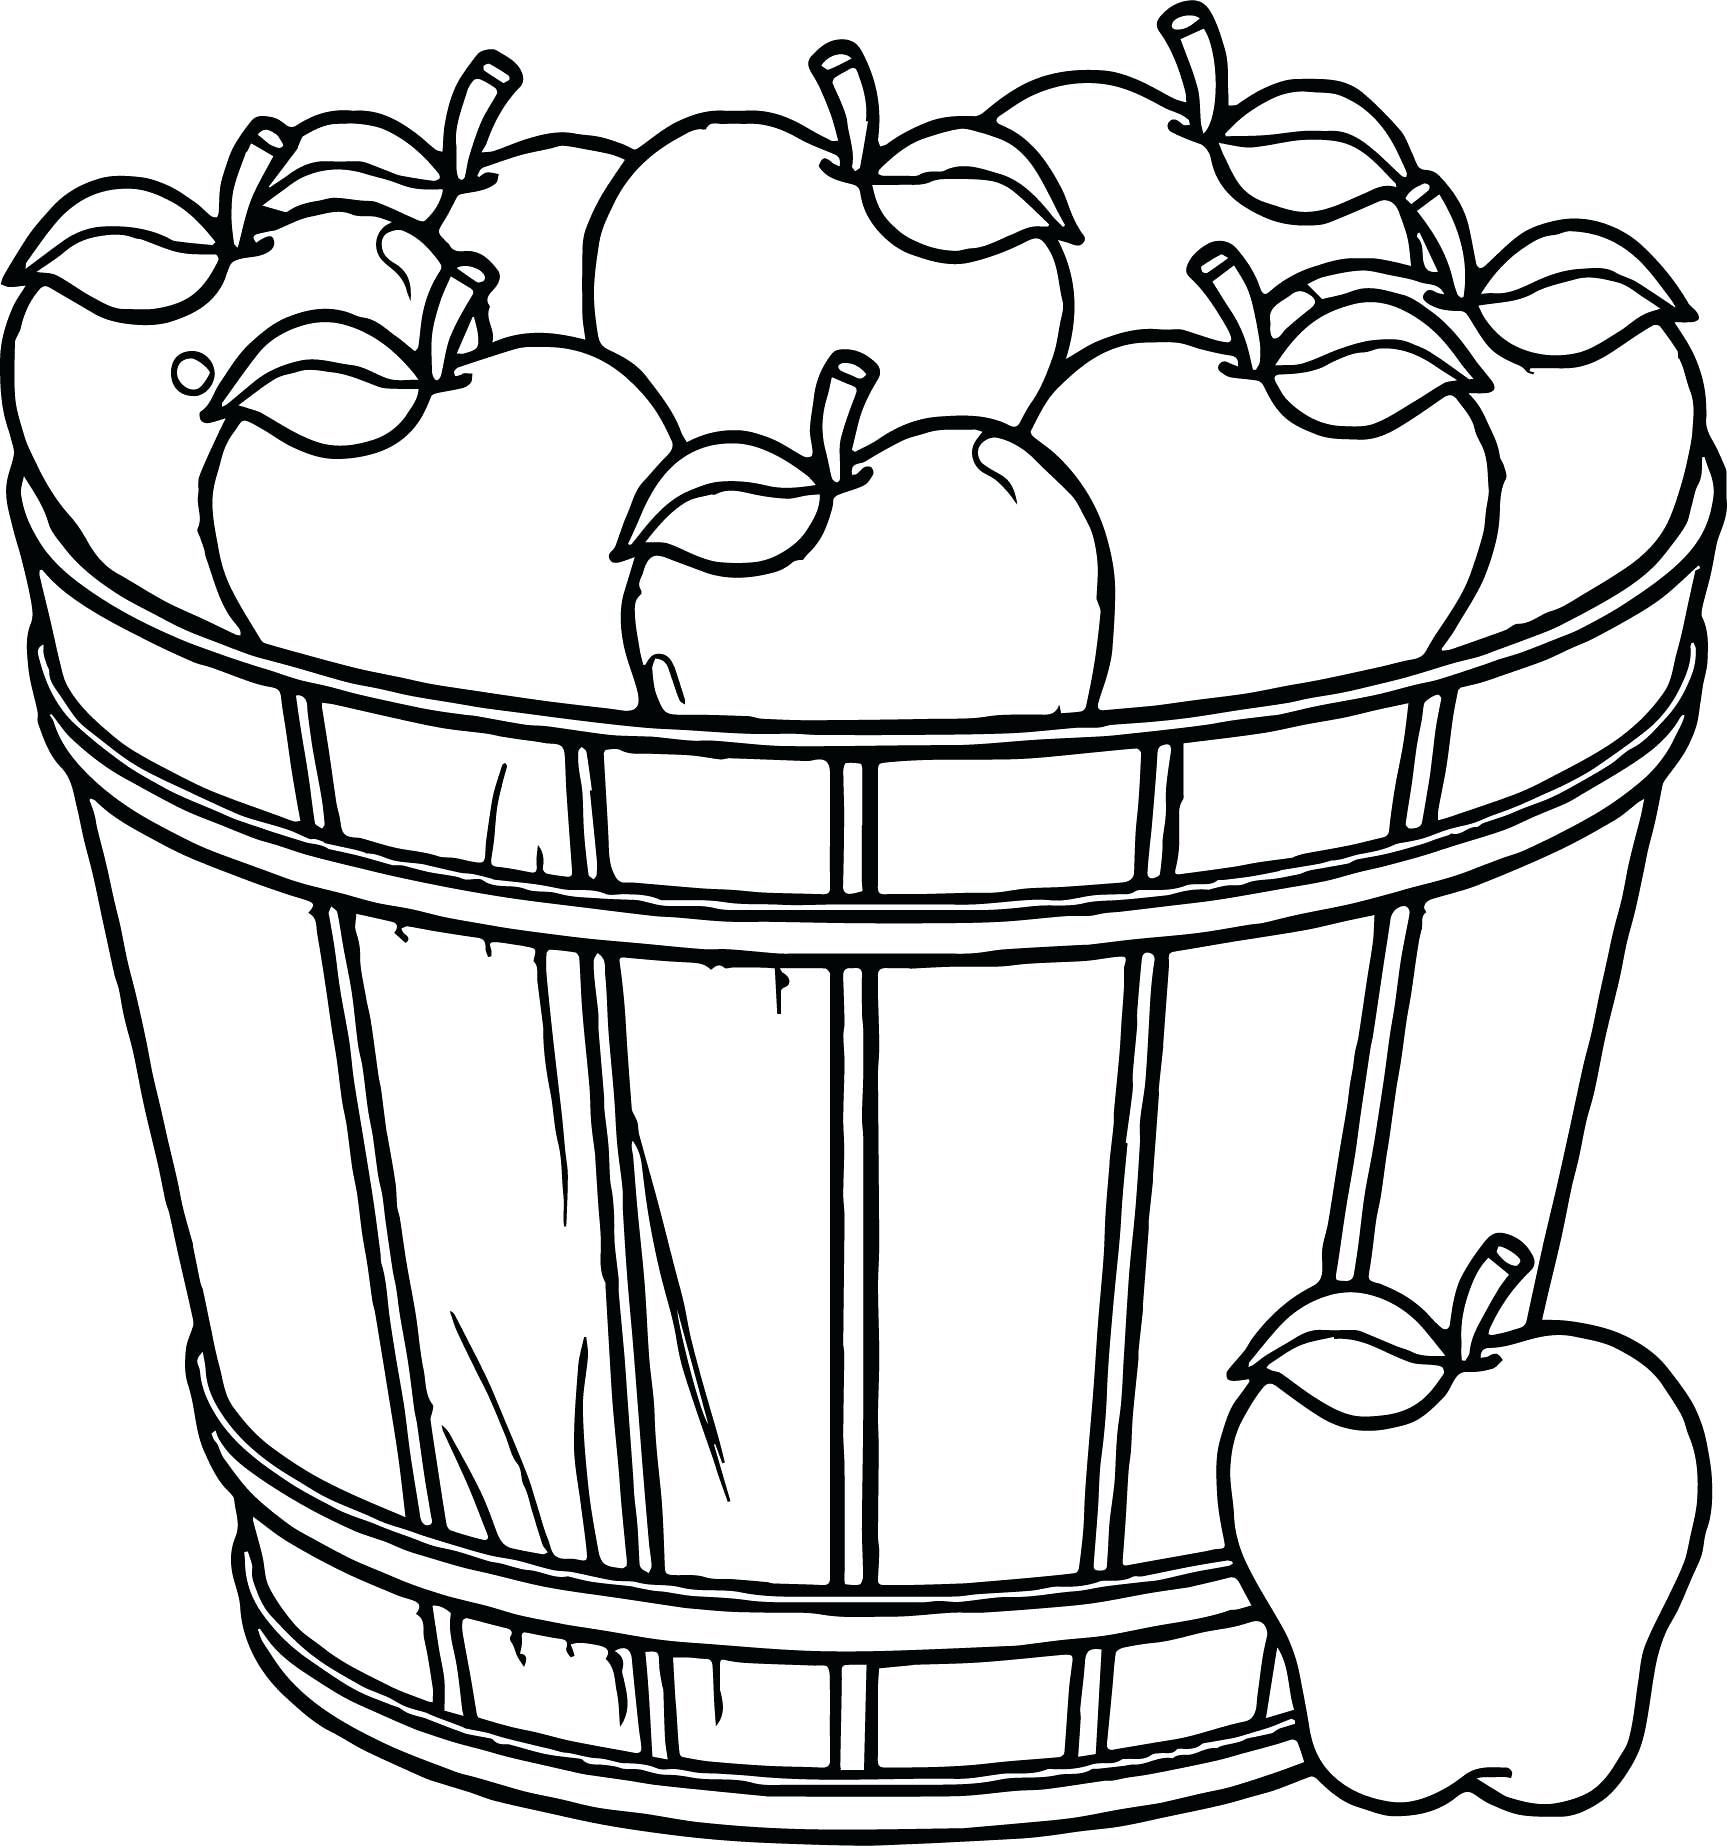 96 Simple Fruit Basket Coloring Page with Animal character